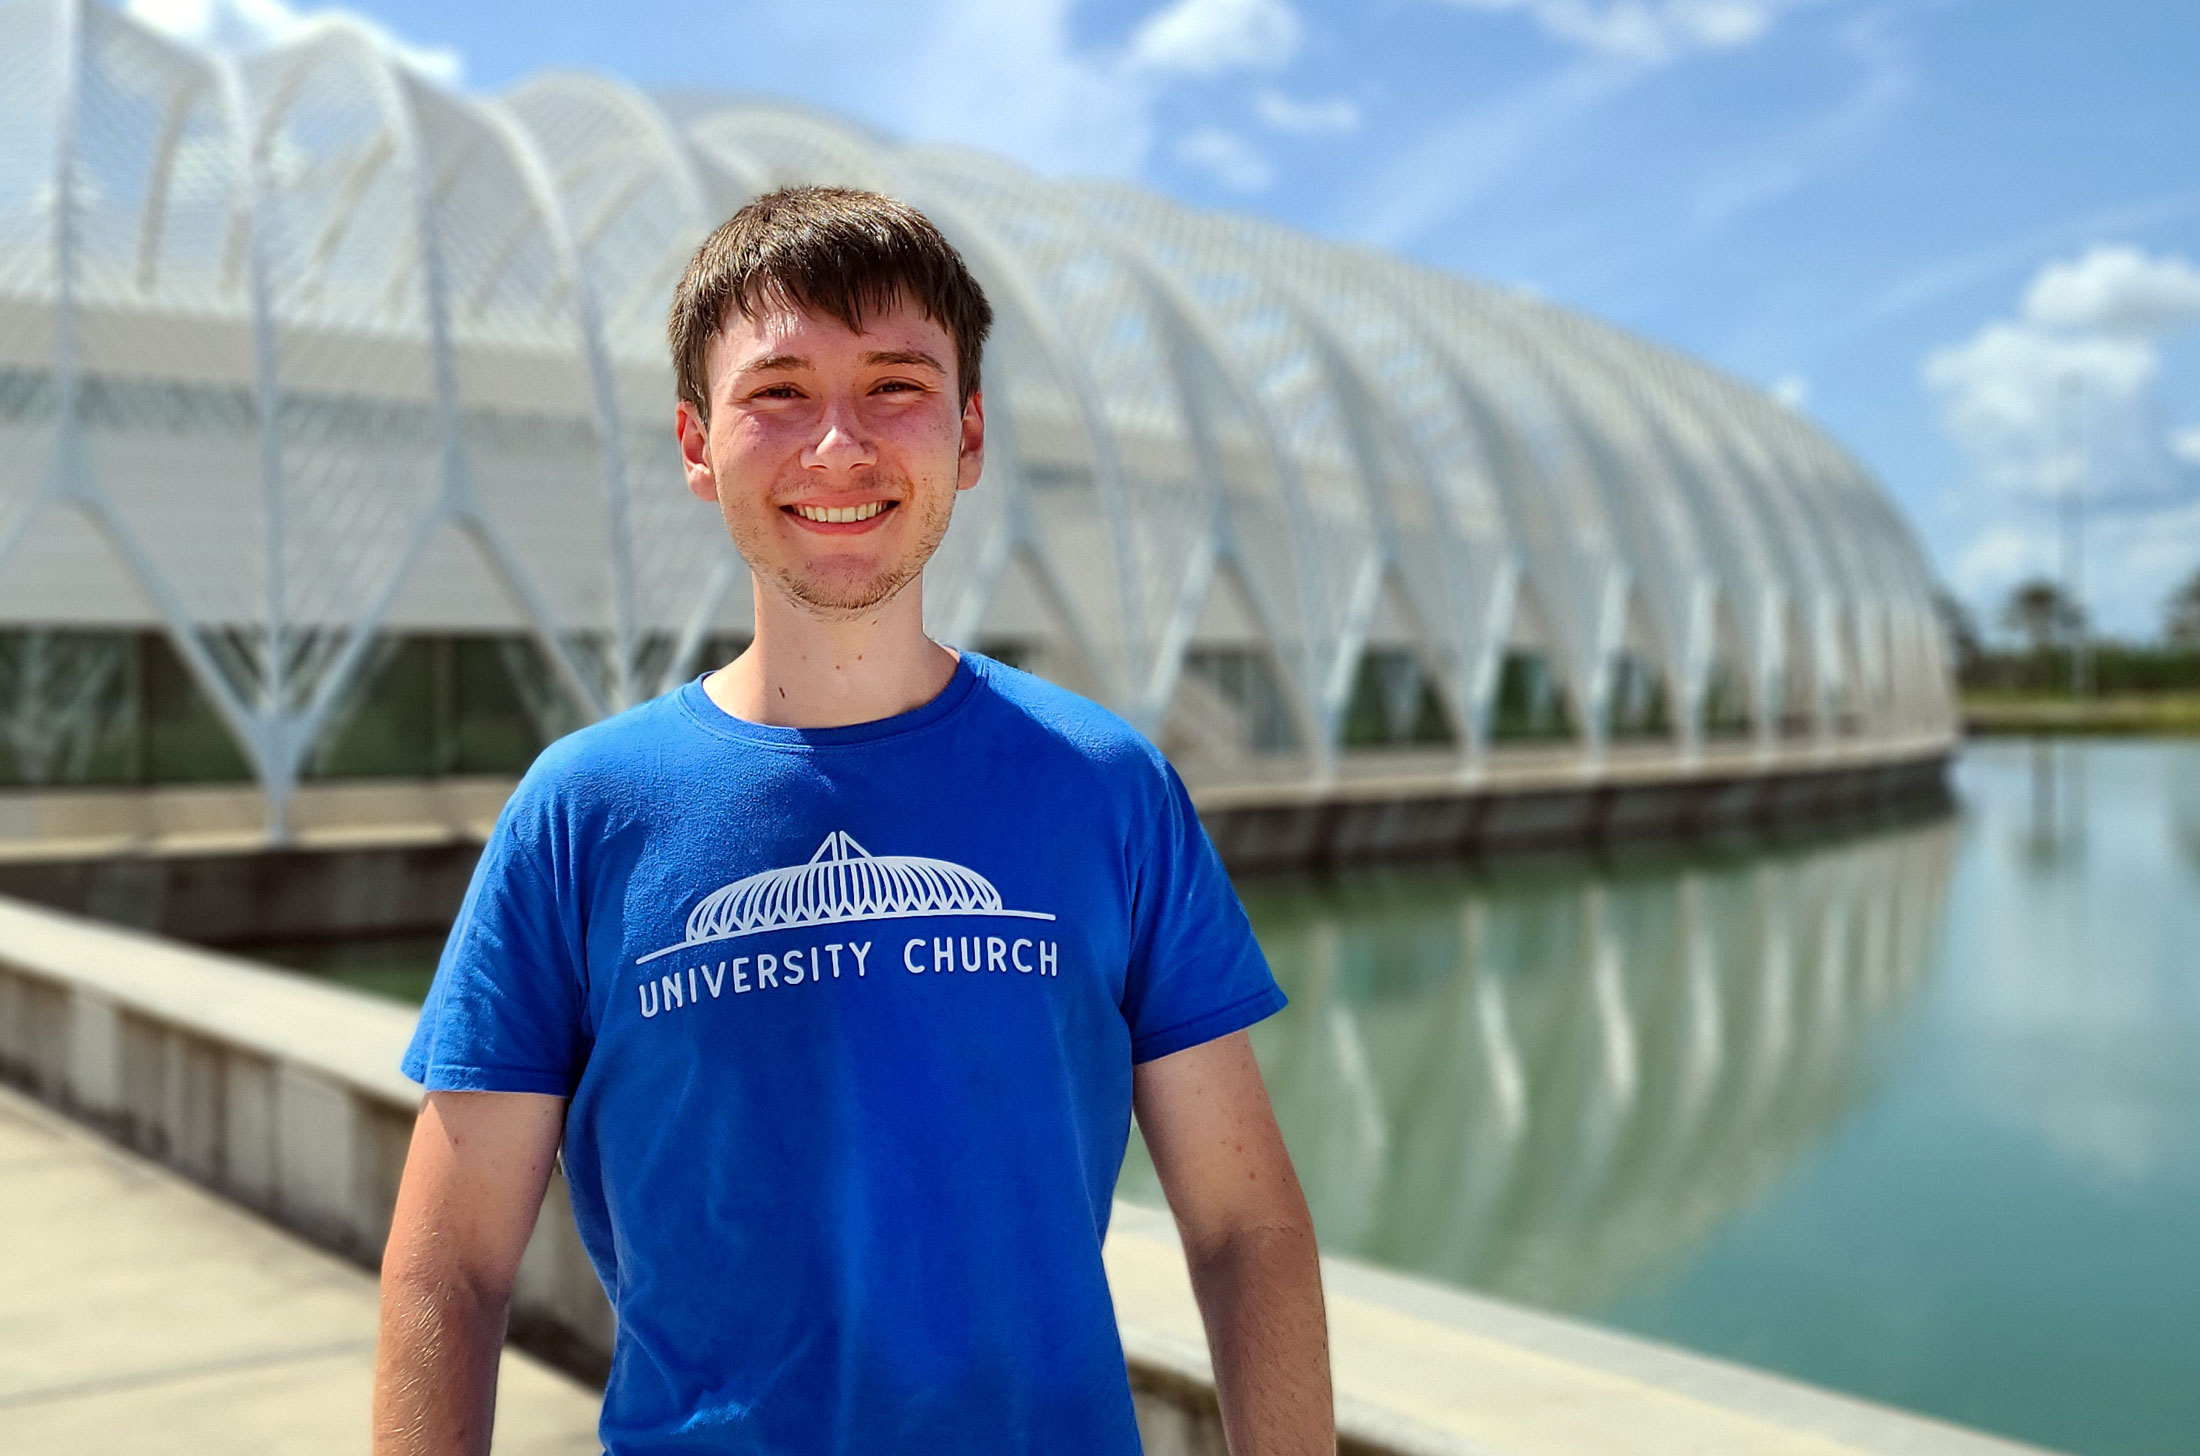 Mark Ellis is a senior majoring in computer science with a concentration in game development and simulation 